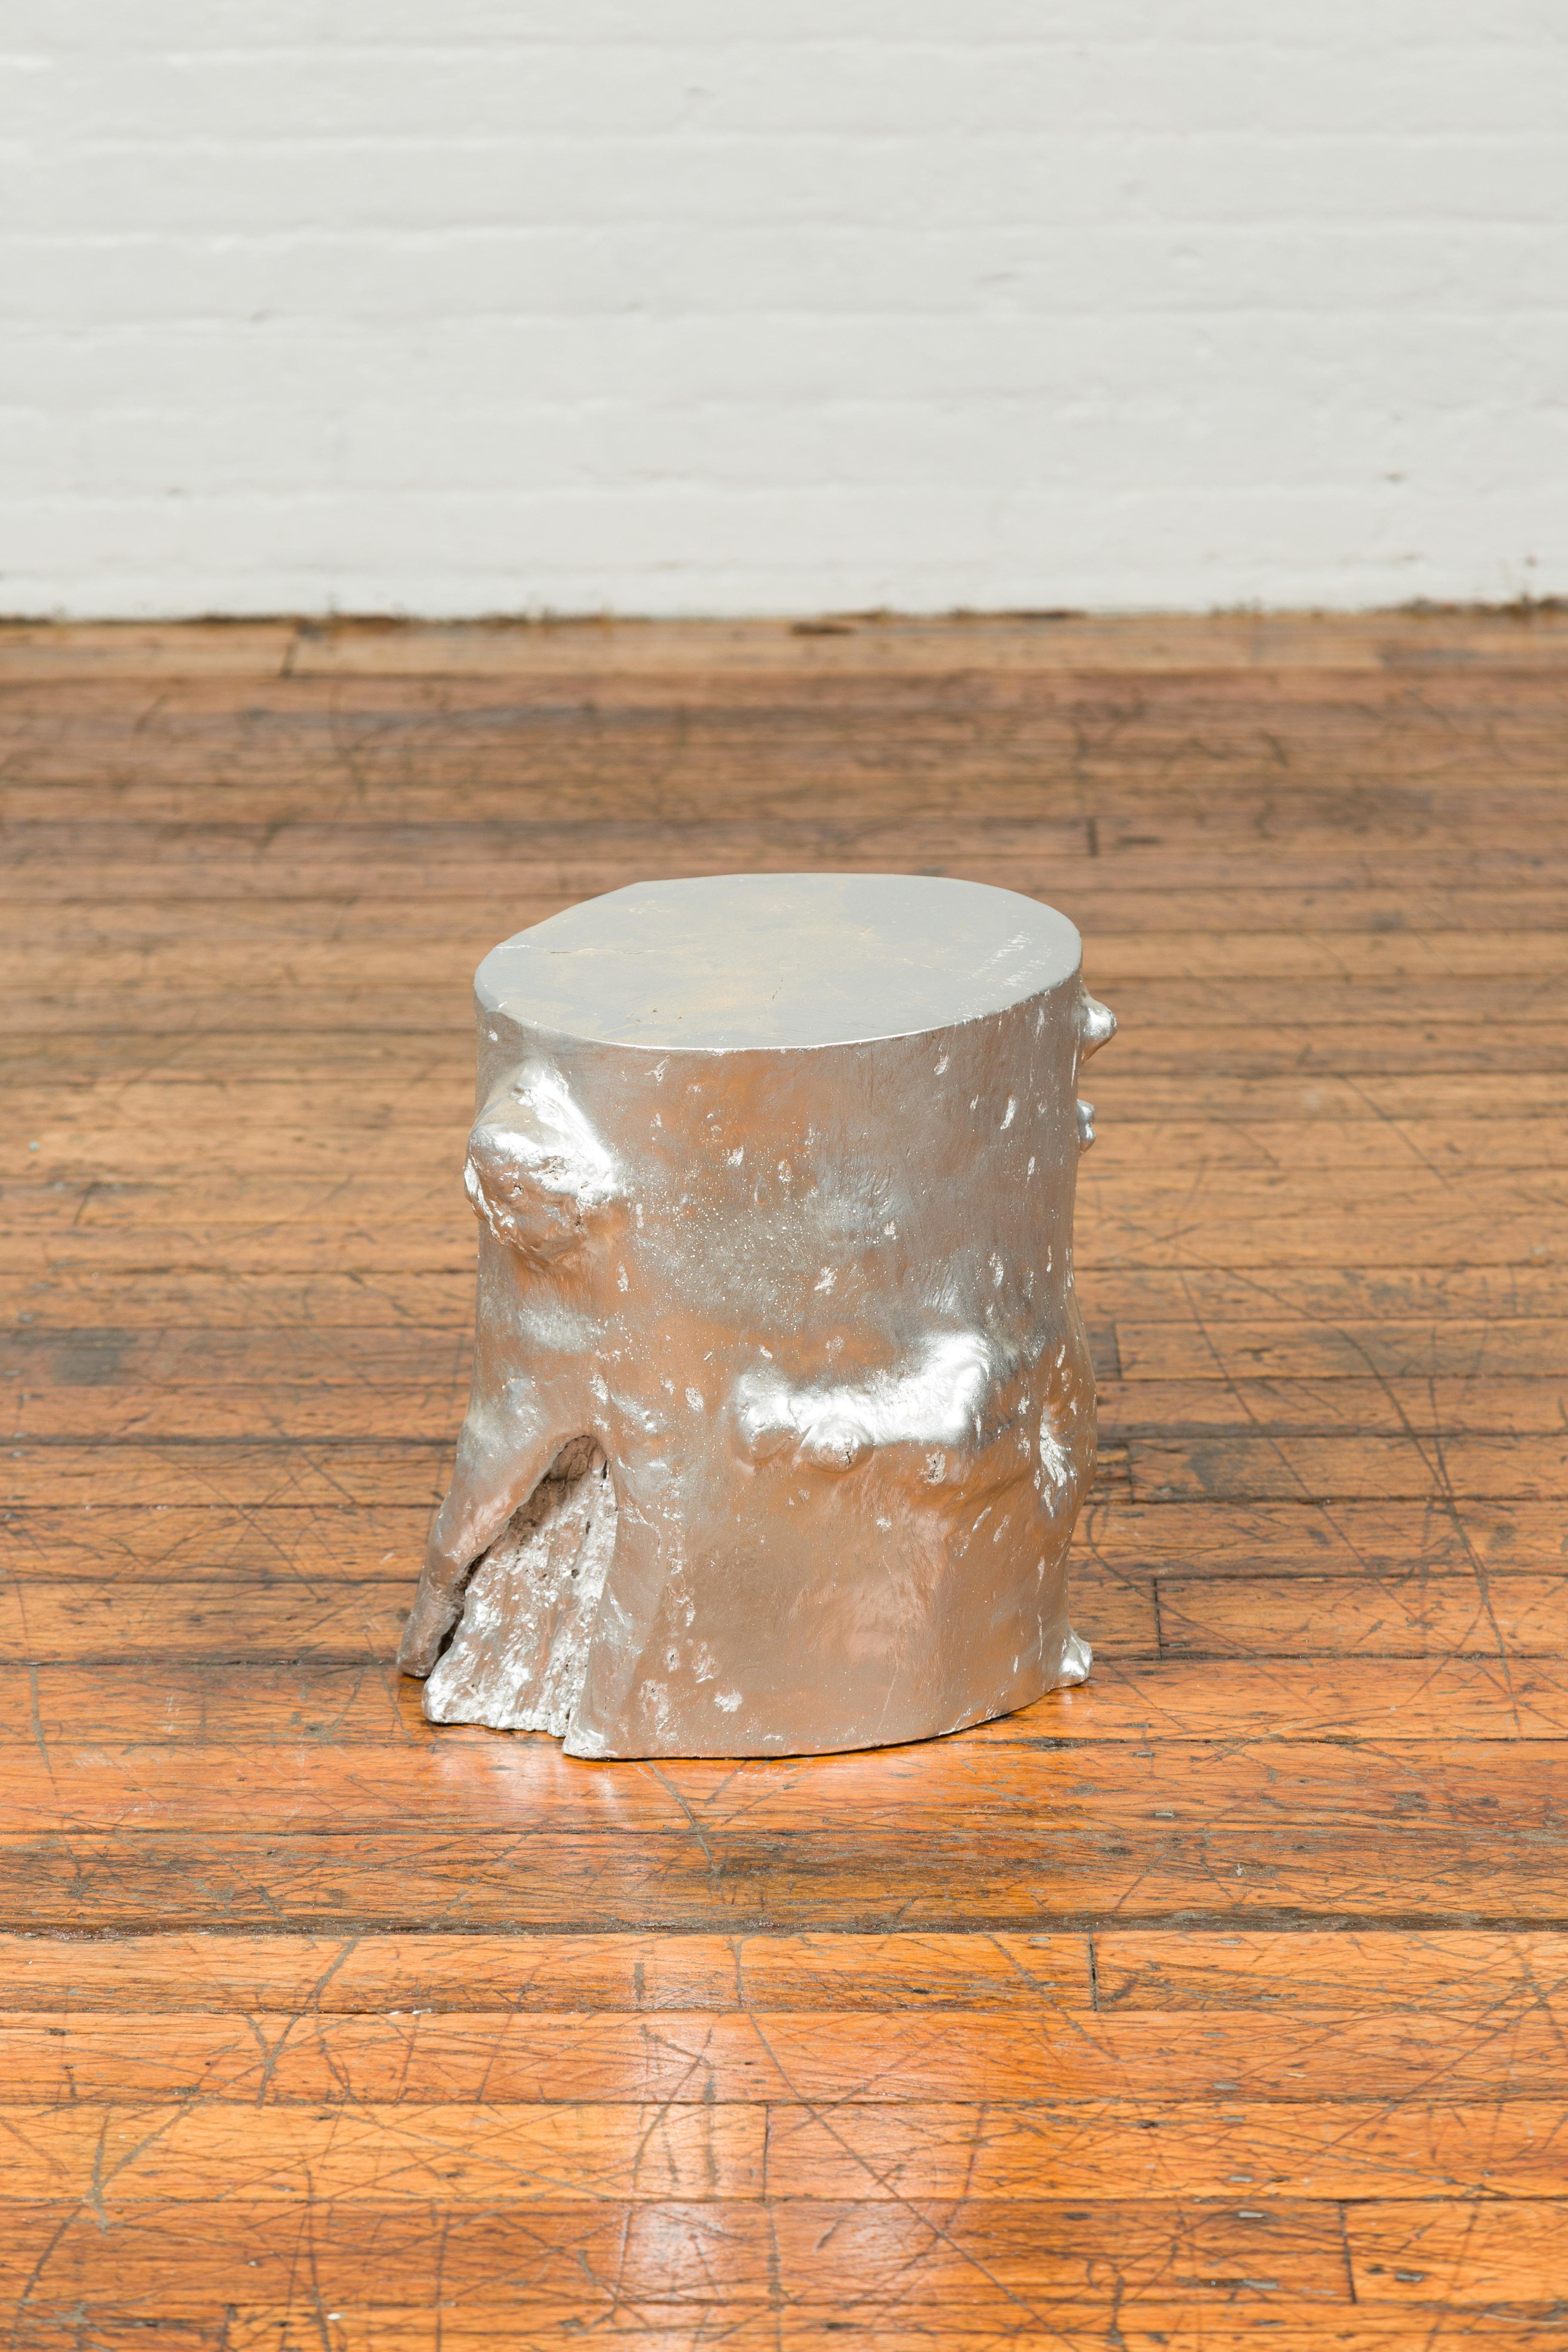 Painted Contemporary Indonesian Silver-Colored Pedestal Tree Stump Pedestal For Sale